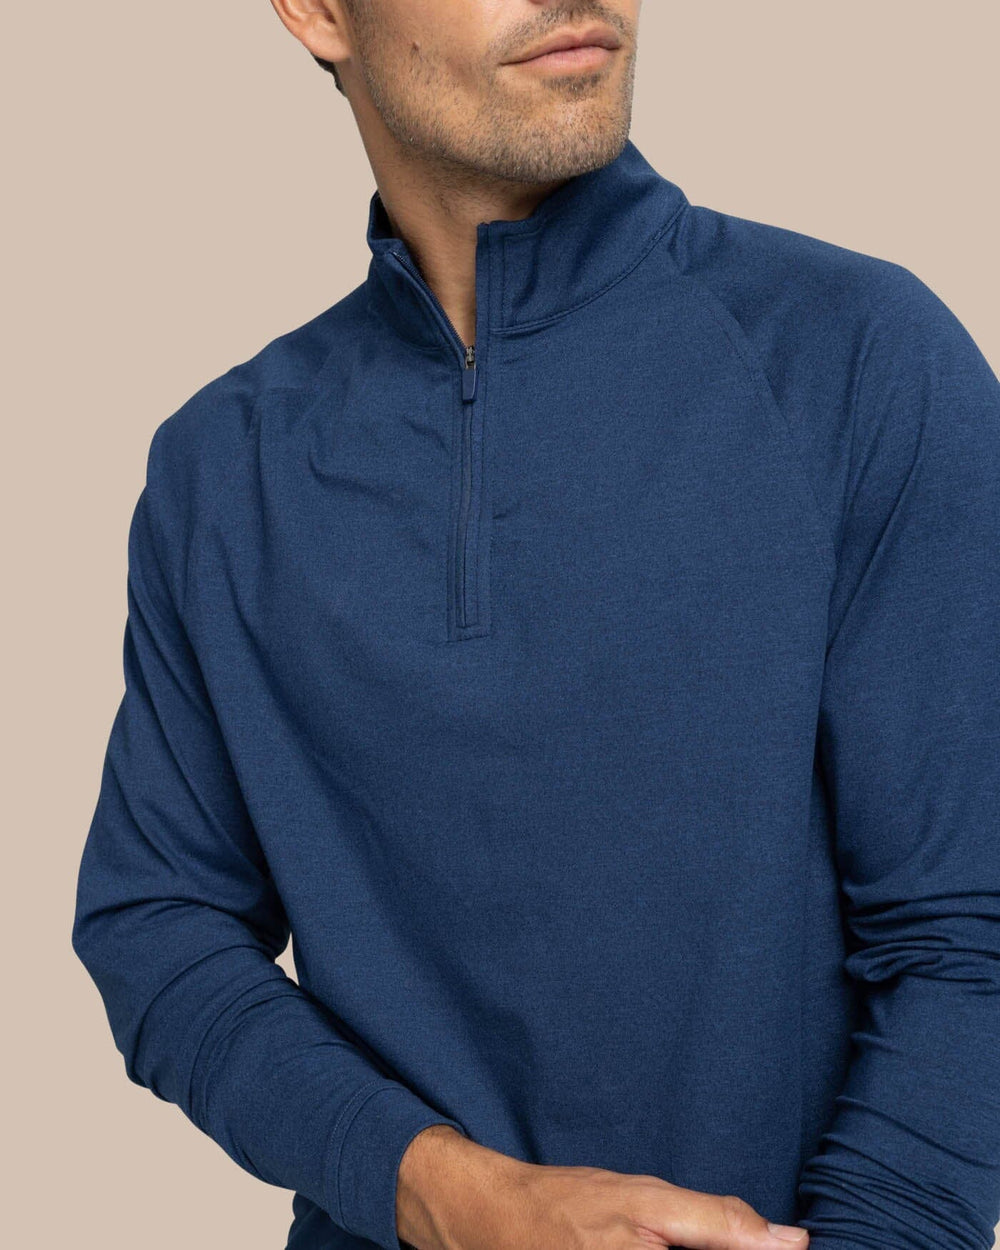 The detail view of the Southern Tide Cruiser Heather Quarter Zip Pullover by Southern Tide - Heather Dress Blue